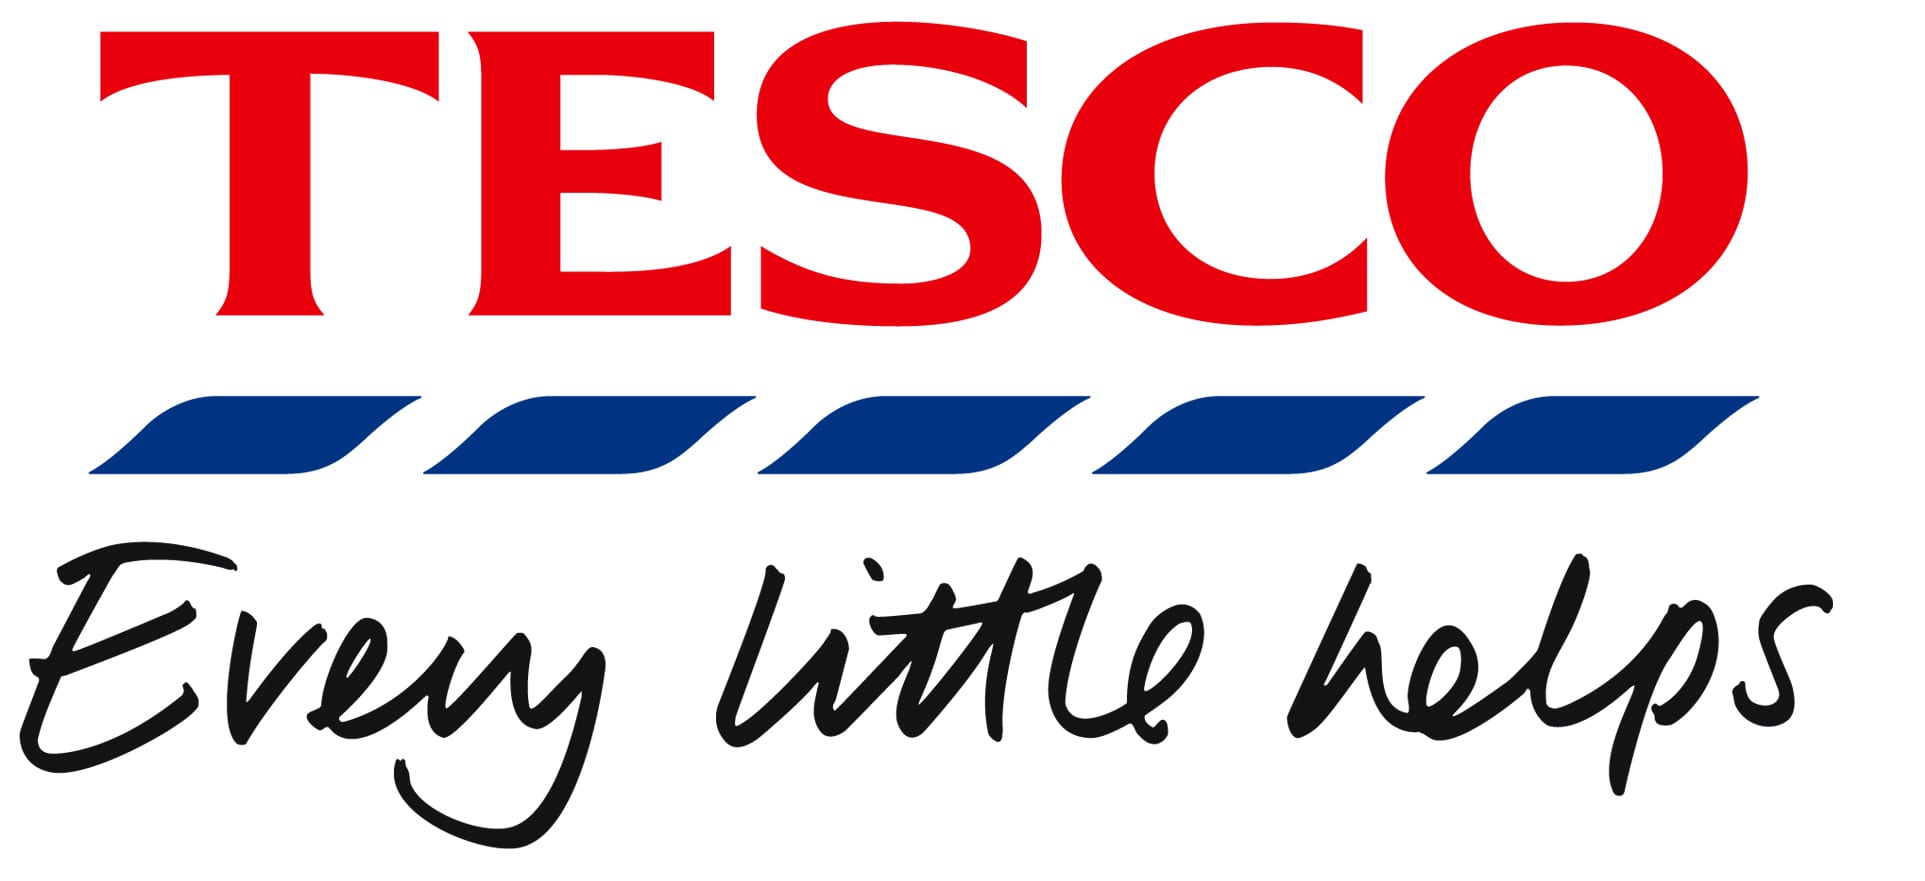 Tesco Stores Every Little Helps Logo